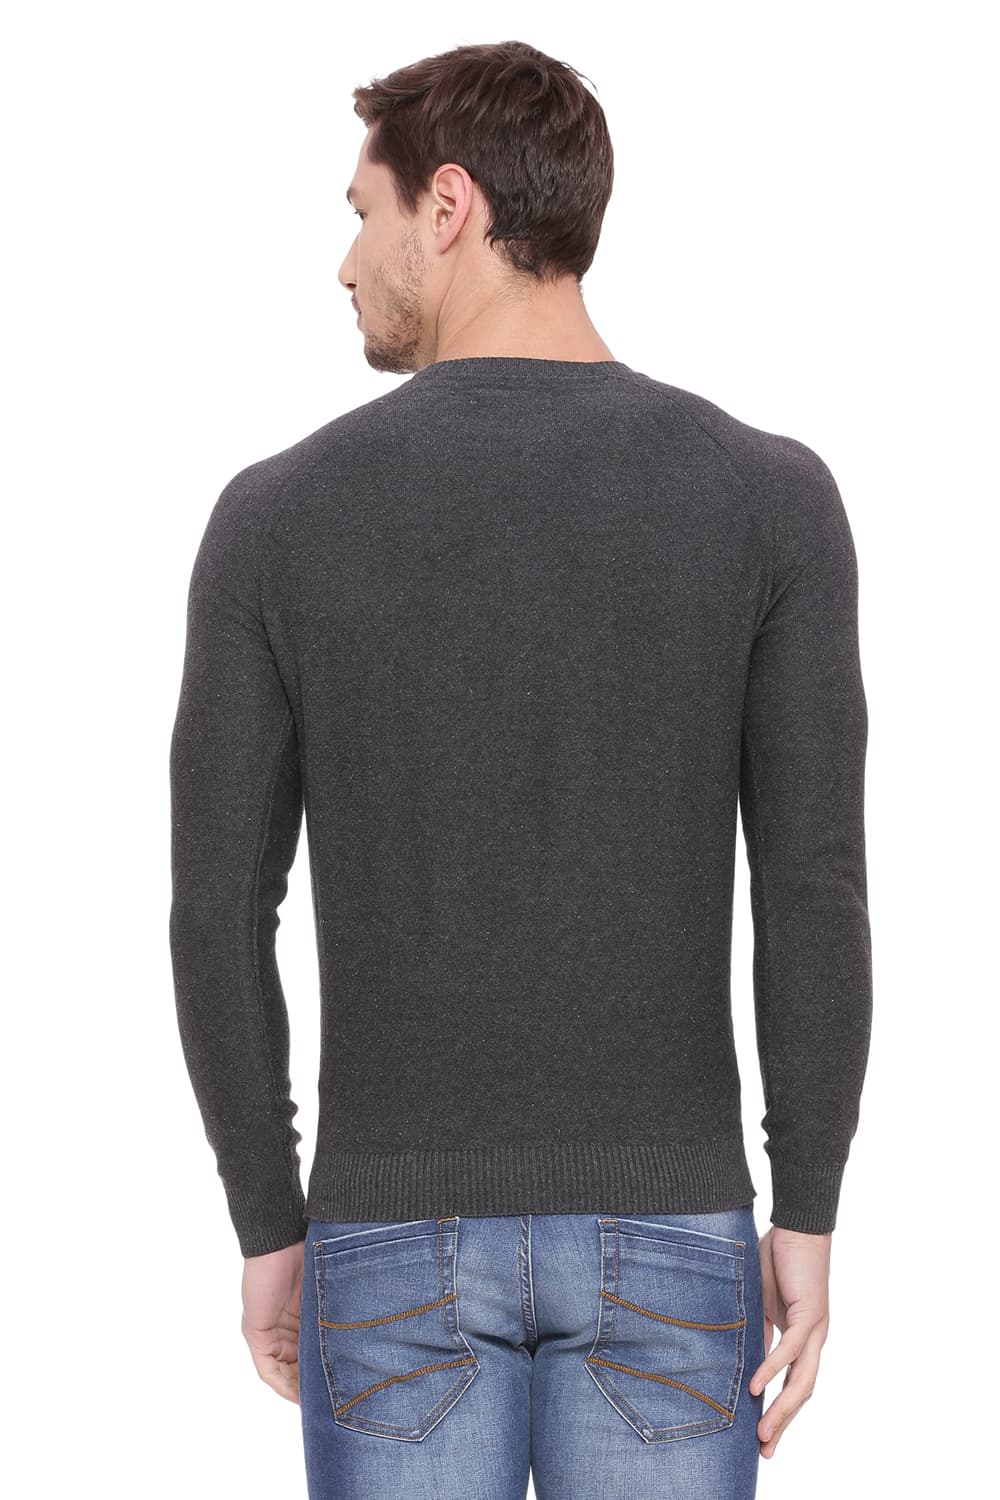 BASICS MUSCLE FIT CREW NECK SWEATER